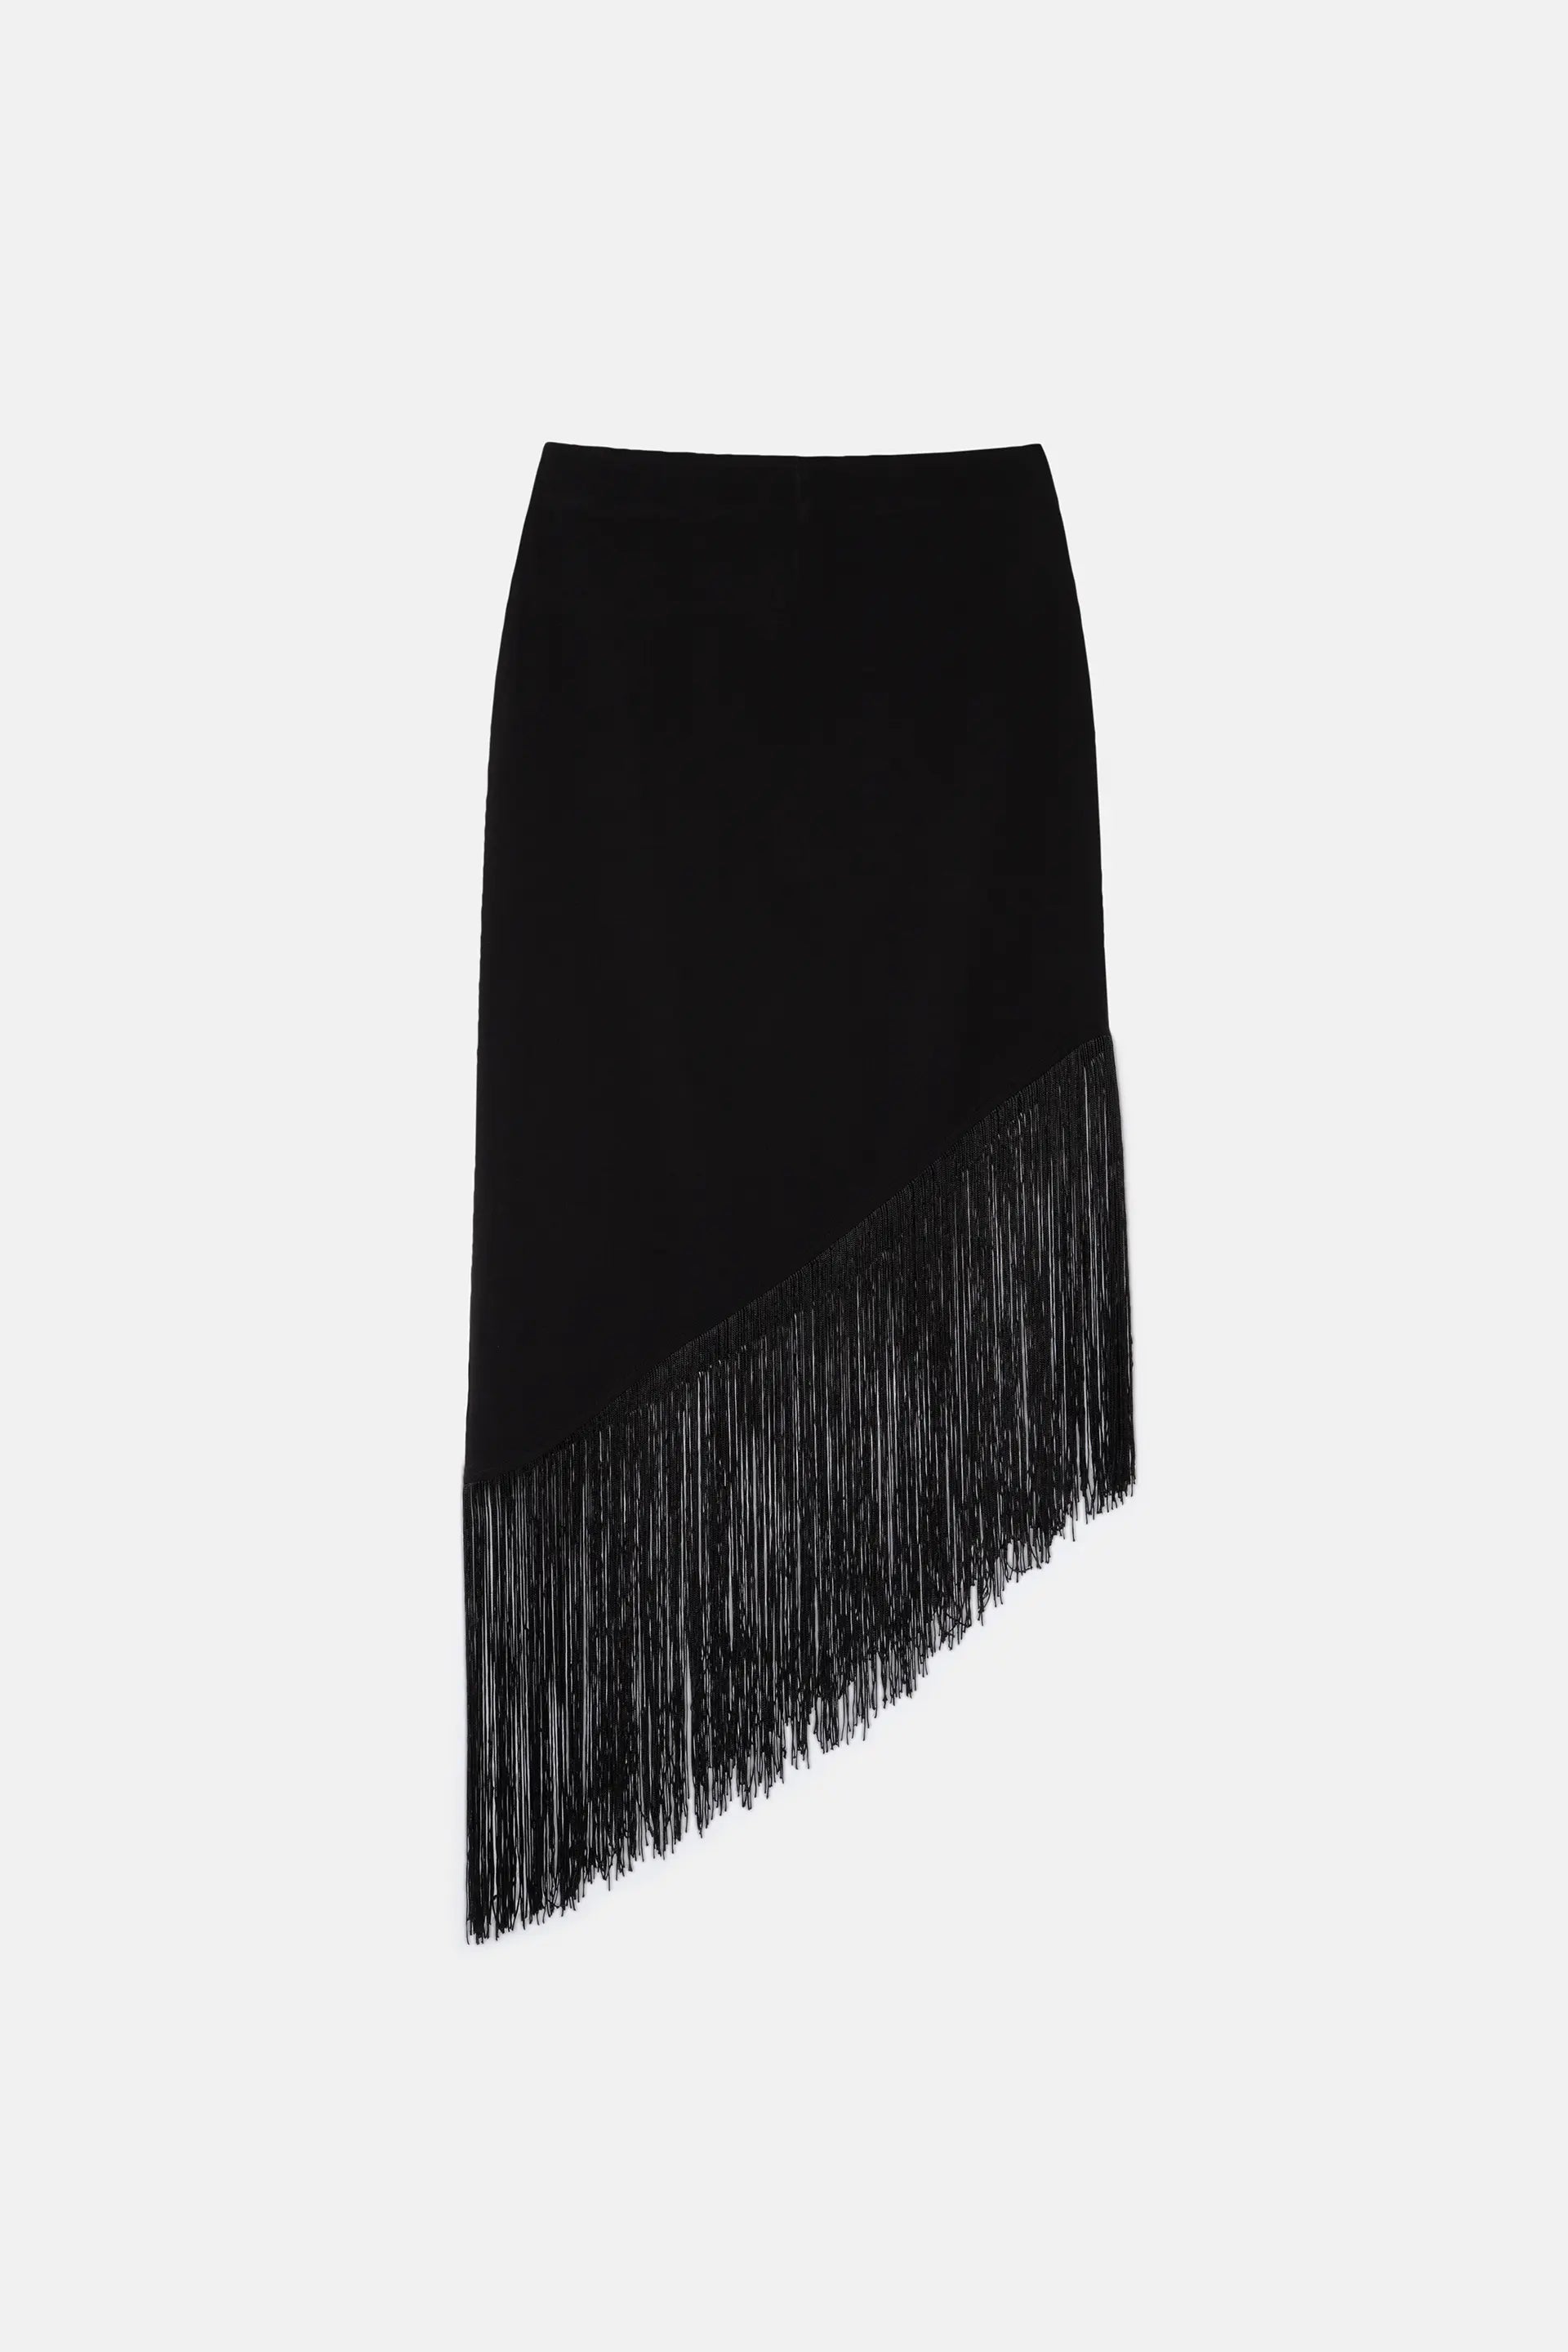 Wild Pony Black asymmetrical midi skirt with fringes - clever alice